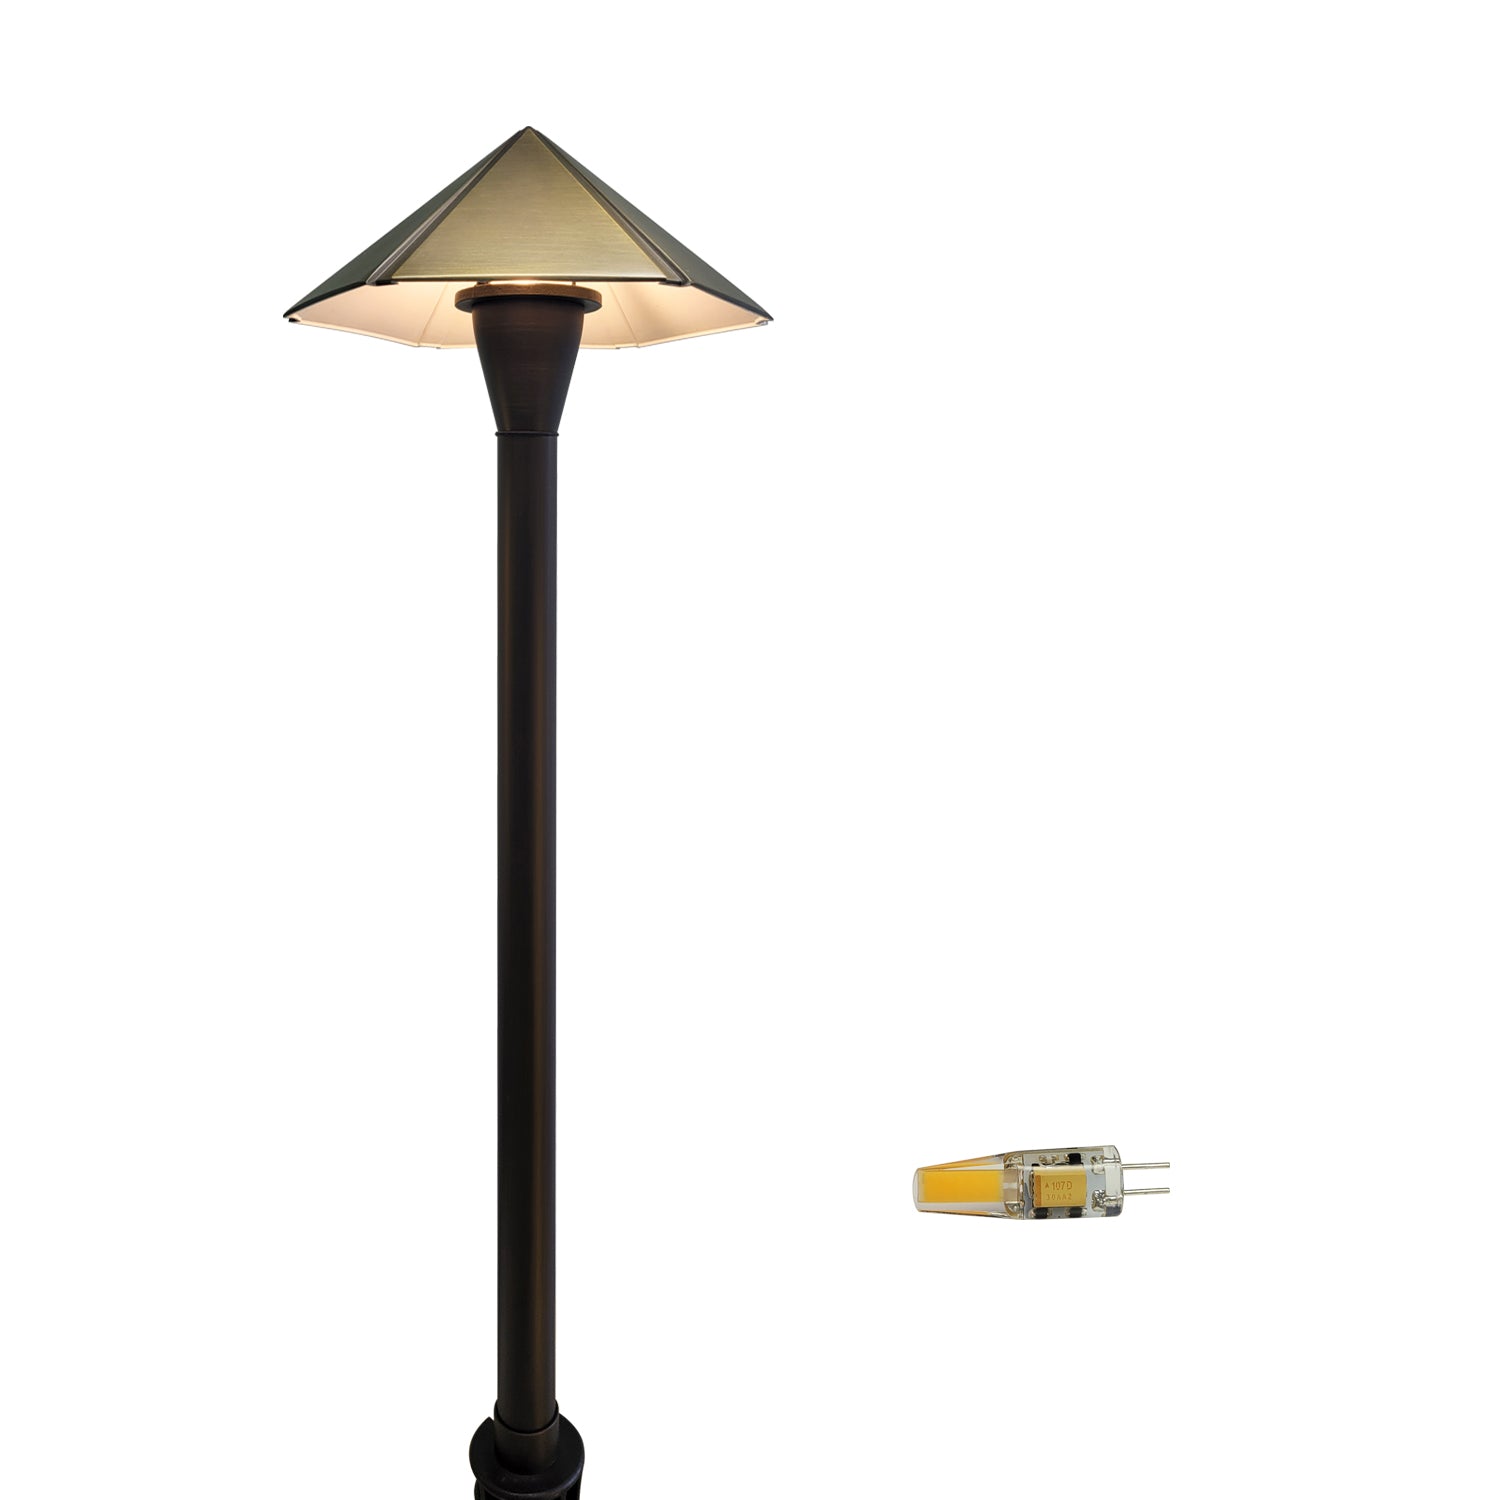 COLOER 12V low voltage brass pathway light with conical shade and adjacent LED bulb for yard and driveway lighting